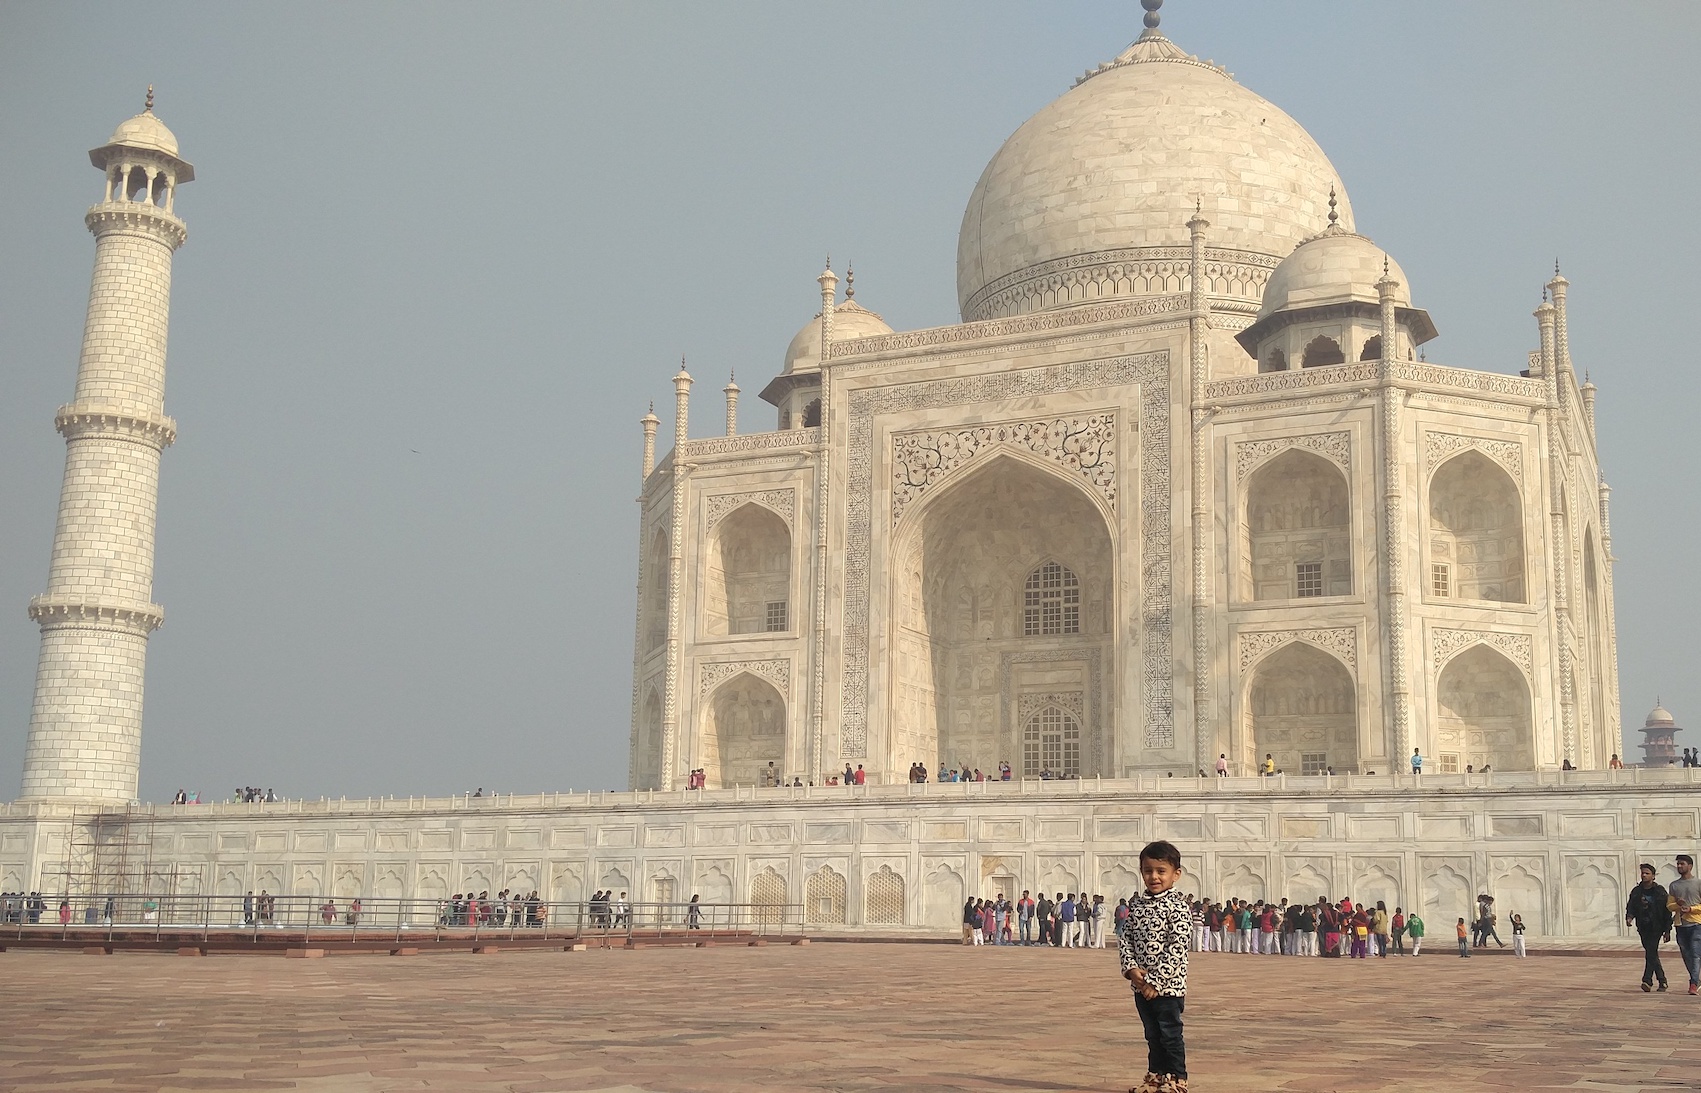 Celebrating World heritage day with kids on April 18. India has ample history, monuments, sites, let us cherish our glorious past and involve kids in knowing their rich history. #India #heritage #TajMahal #mughalgardens #Unesco #worldheritageday